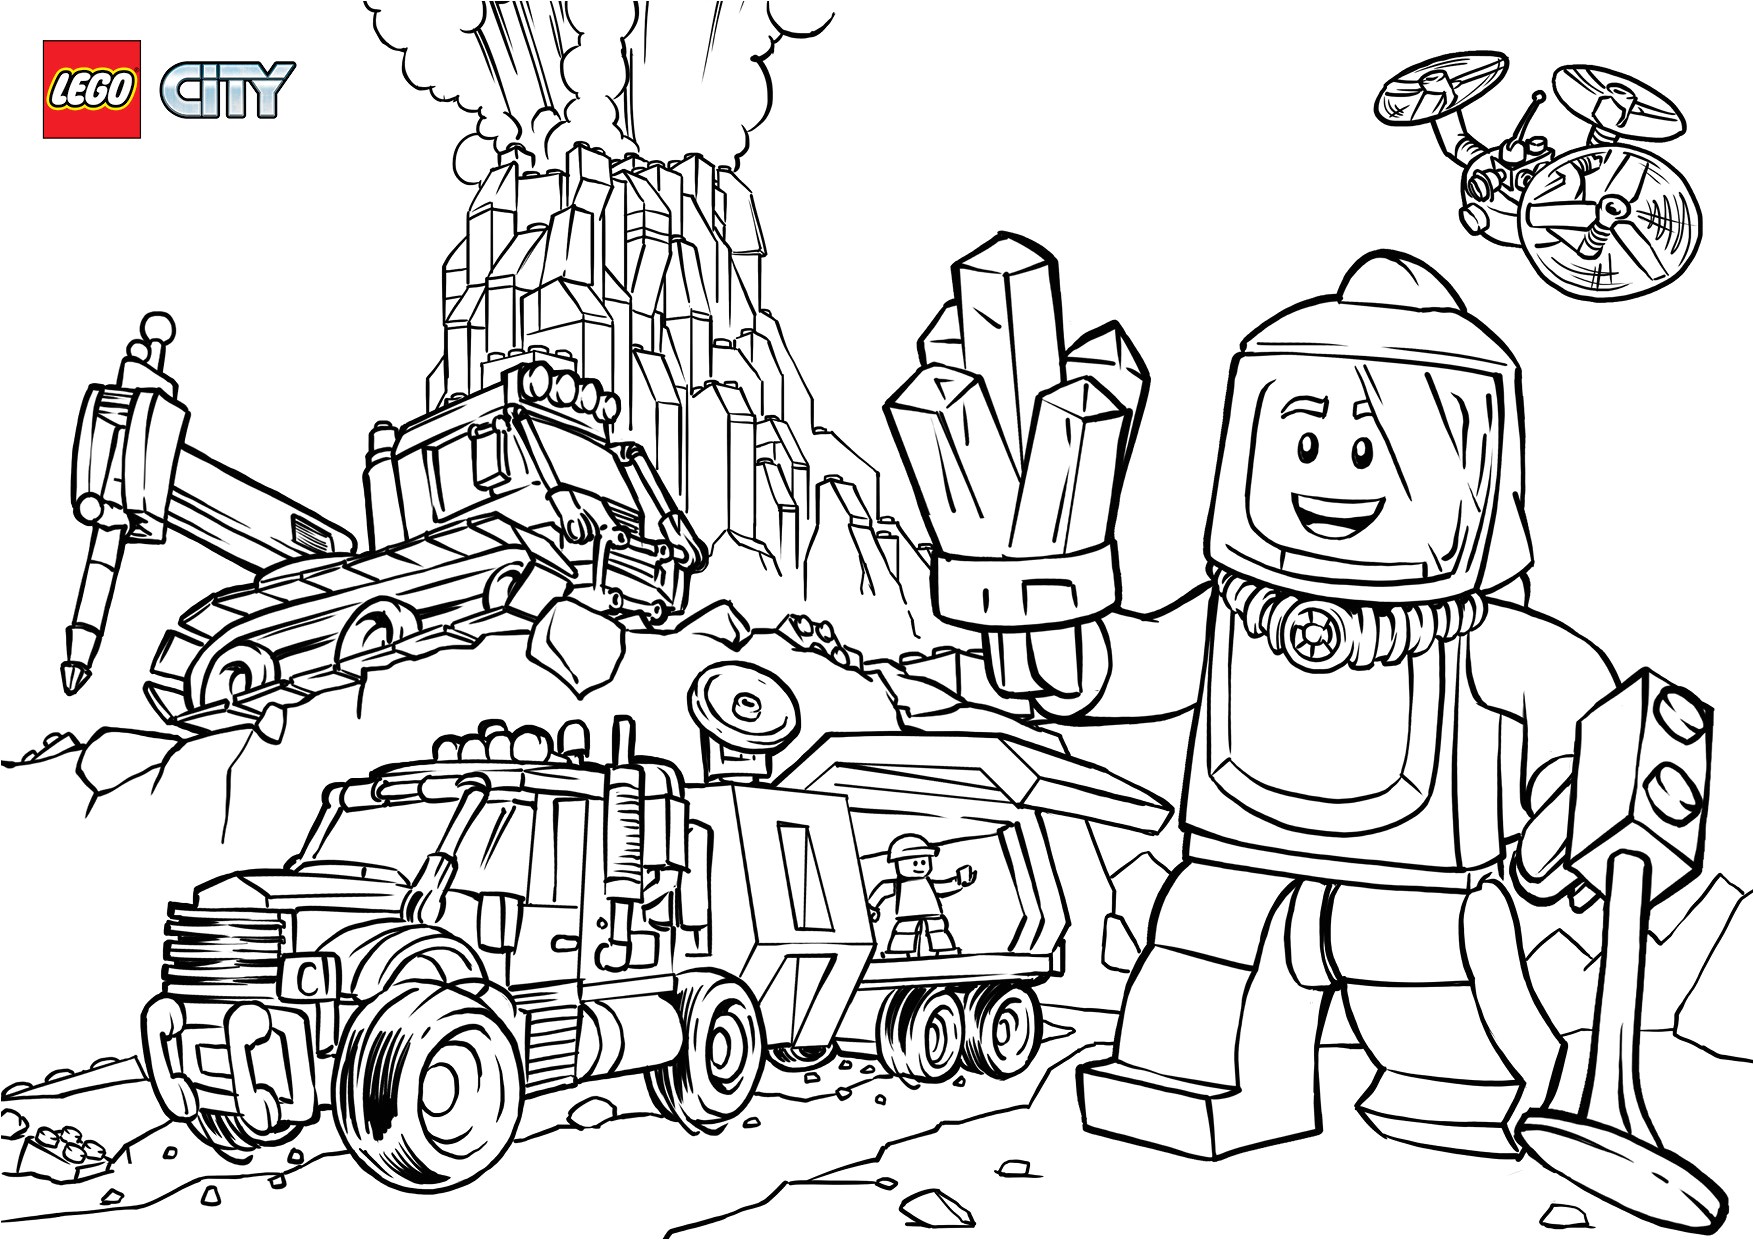 Lego City Coloring Pages Printable Coloring Image